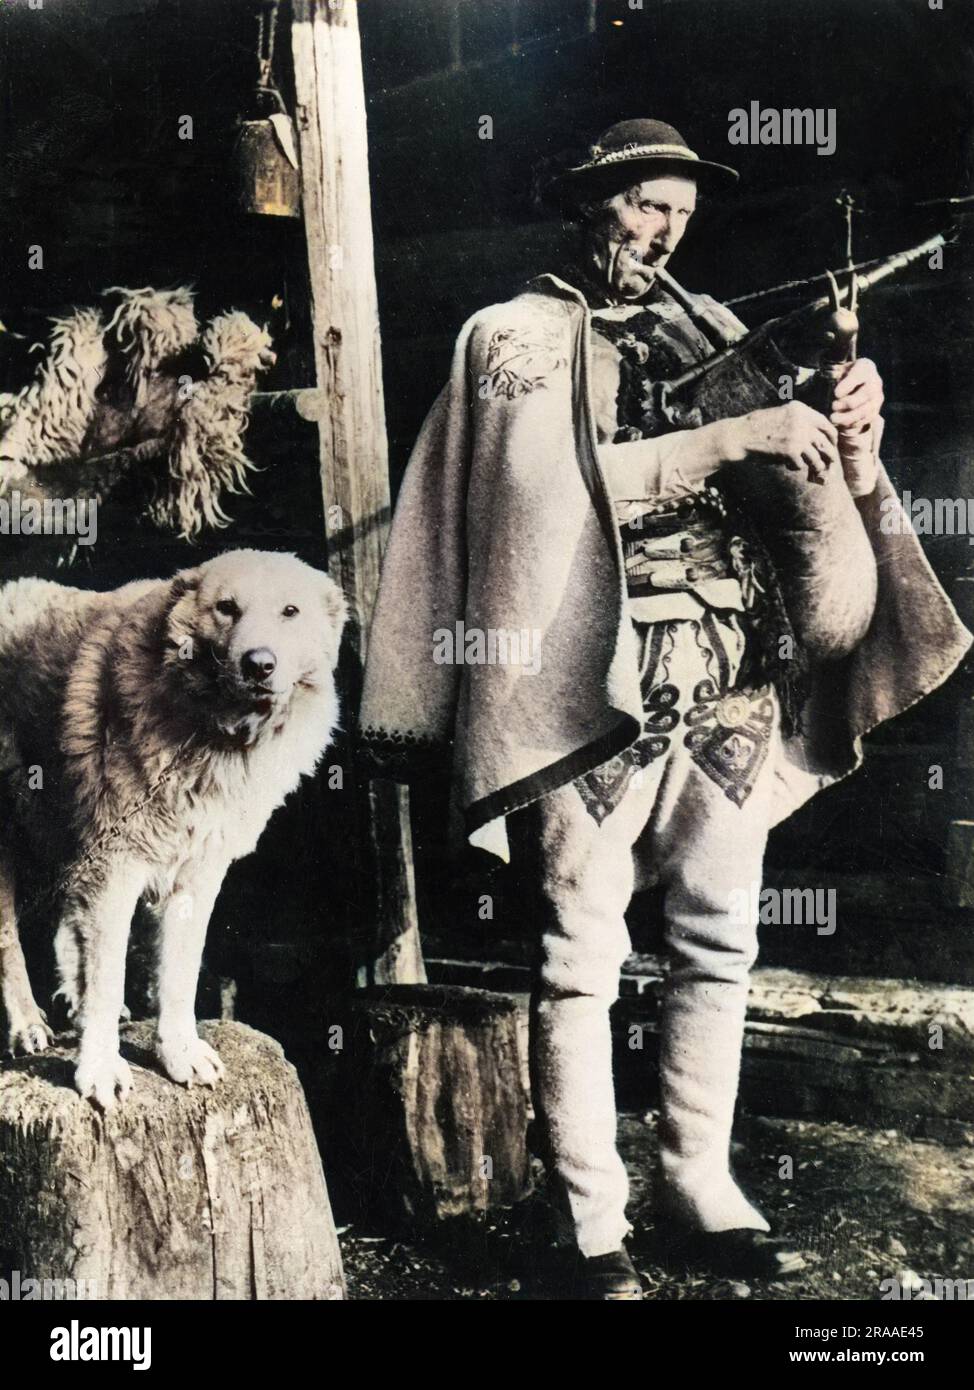 An old man playing the bagpipes in the Tatra mountains of Poland. His costume is made of embroidered goatskin and his dog is a breed peculiar to the area.     Date: 1930s Stock Photo